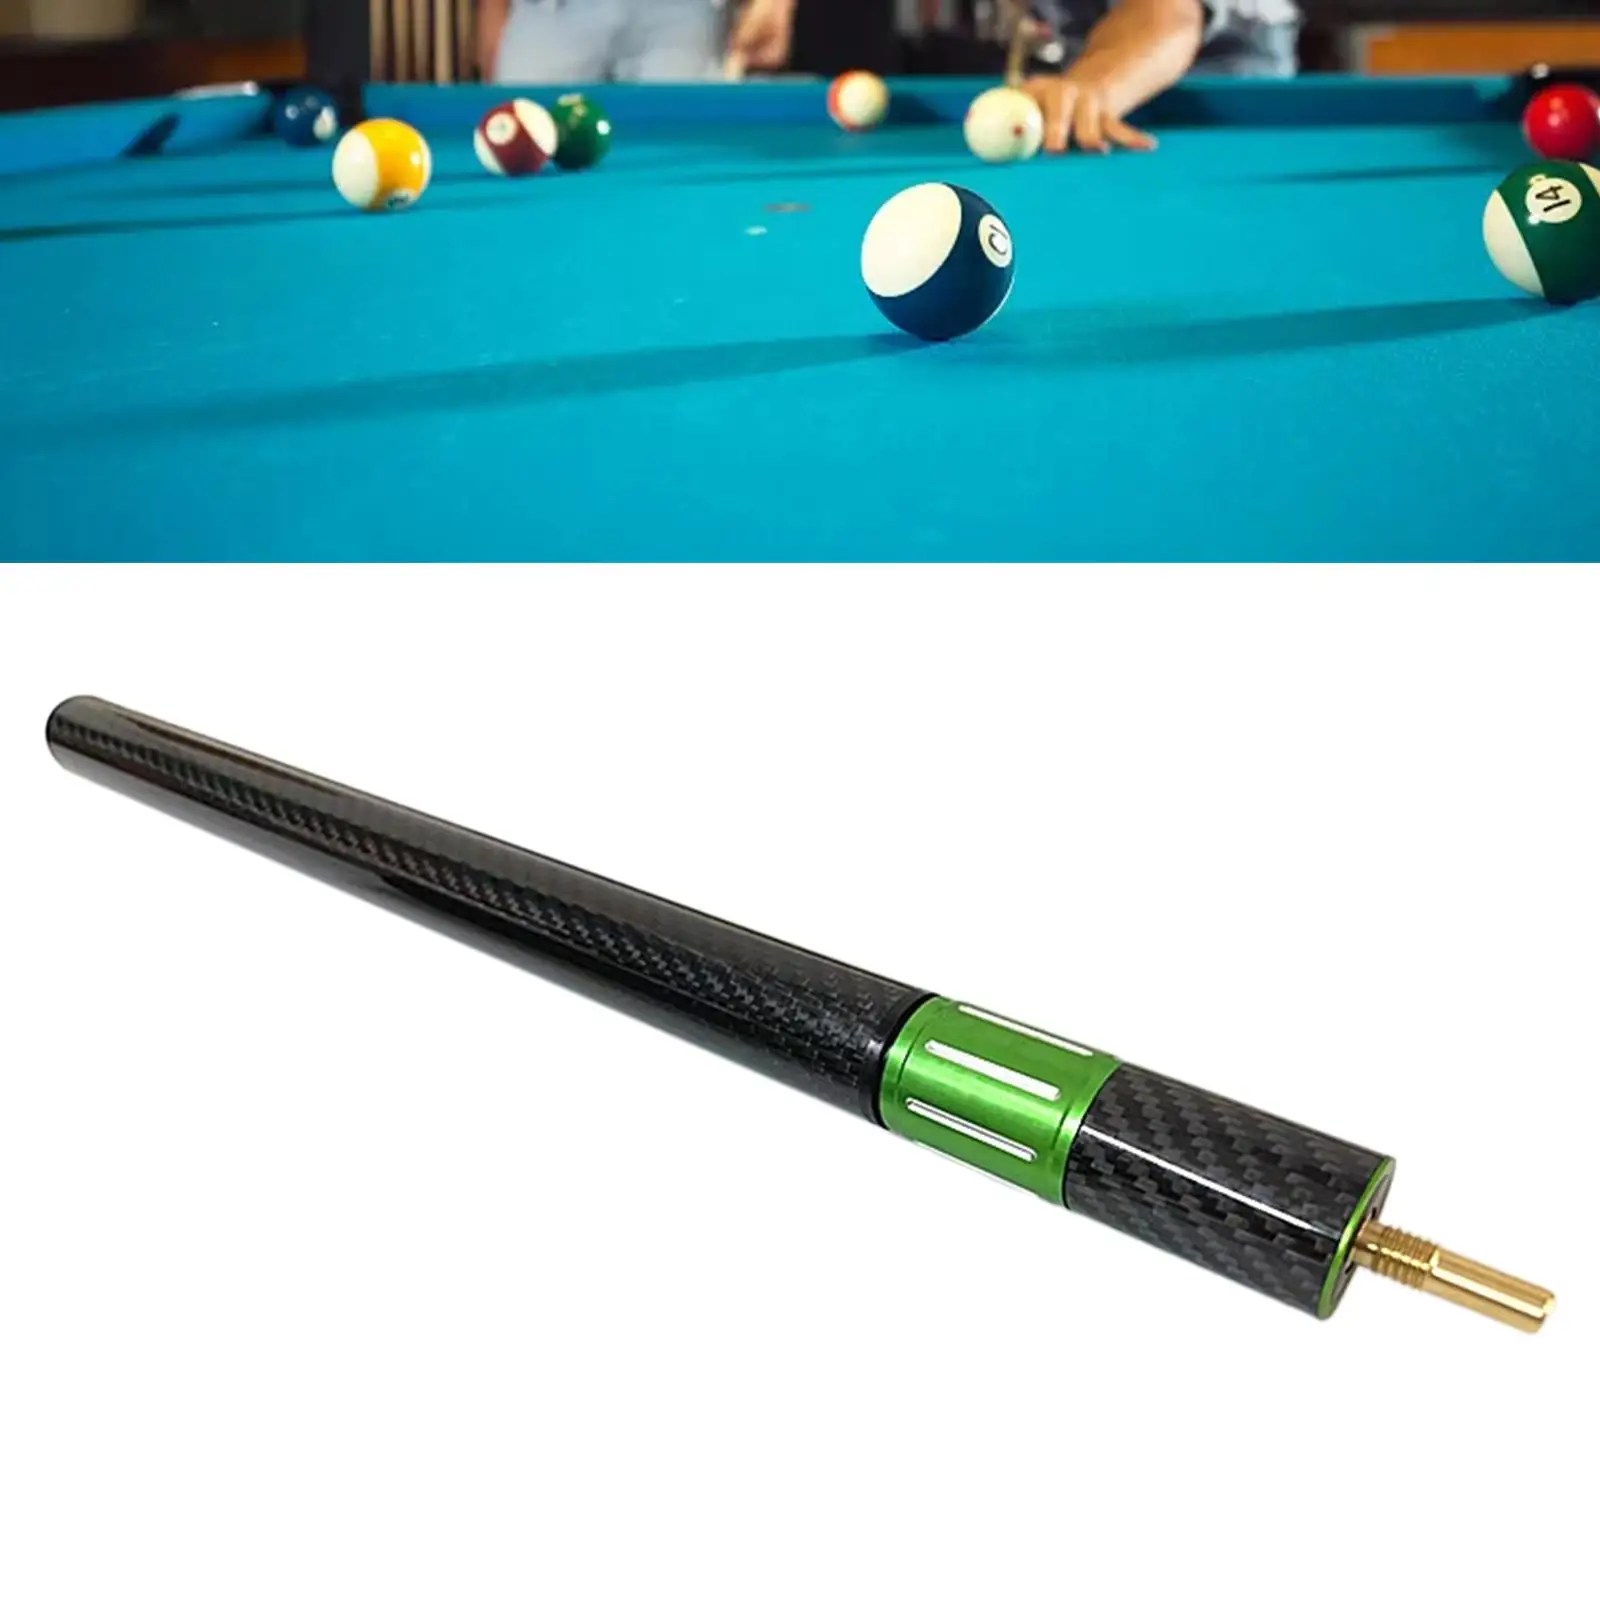 Billiard Cue Extension Exercise Equipment Pool Accessory Pool Cue Extender